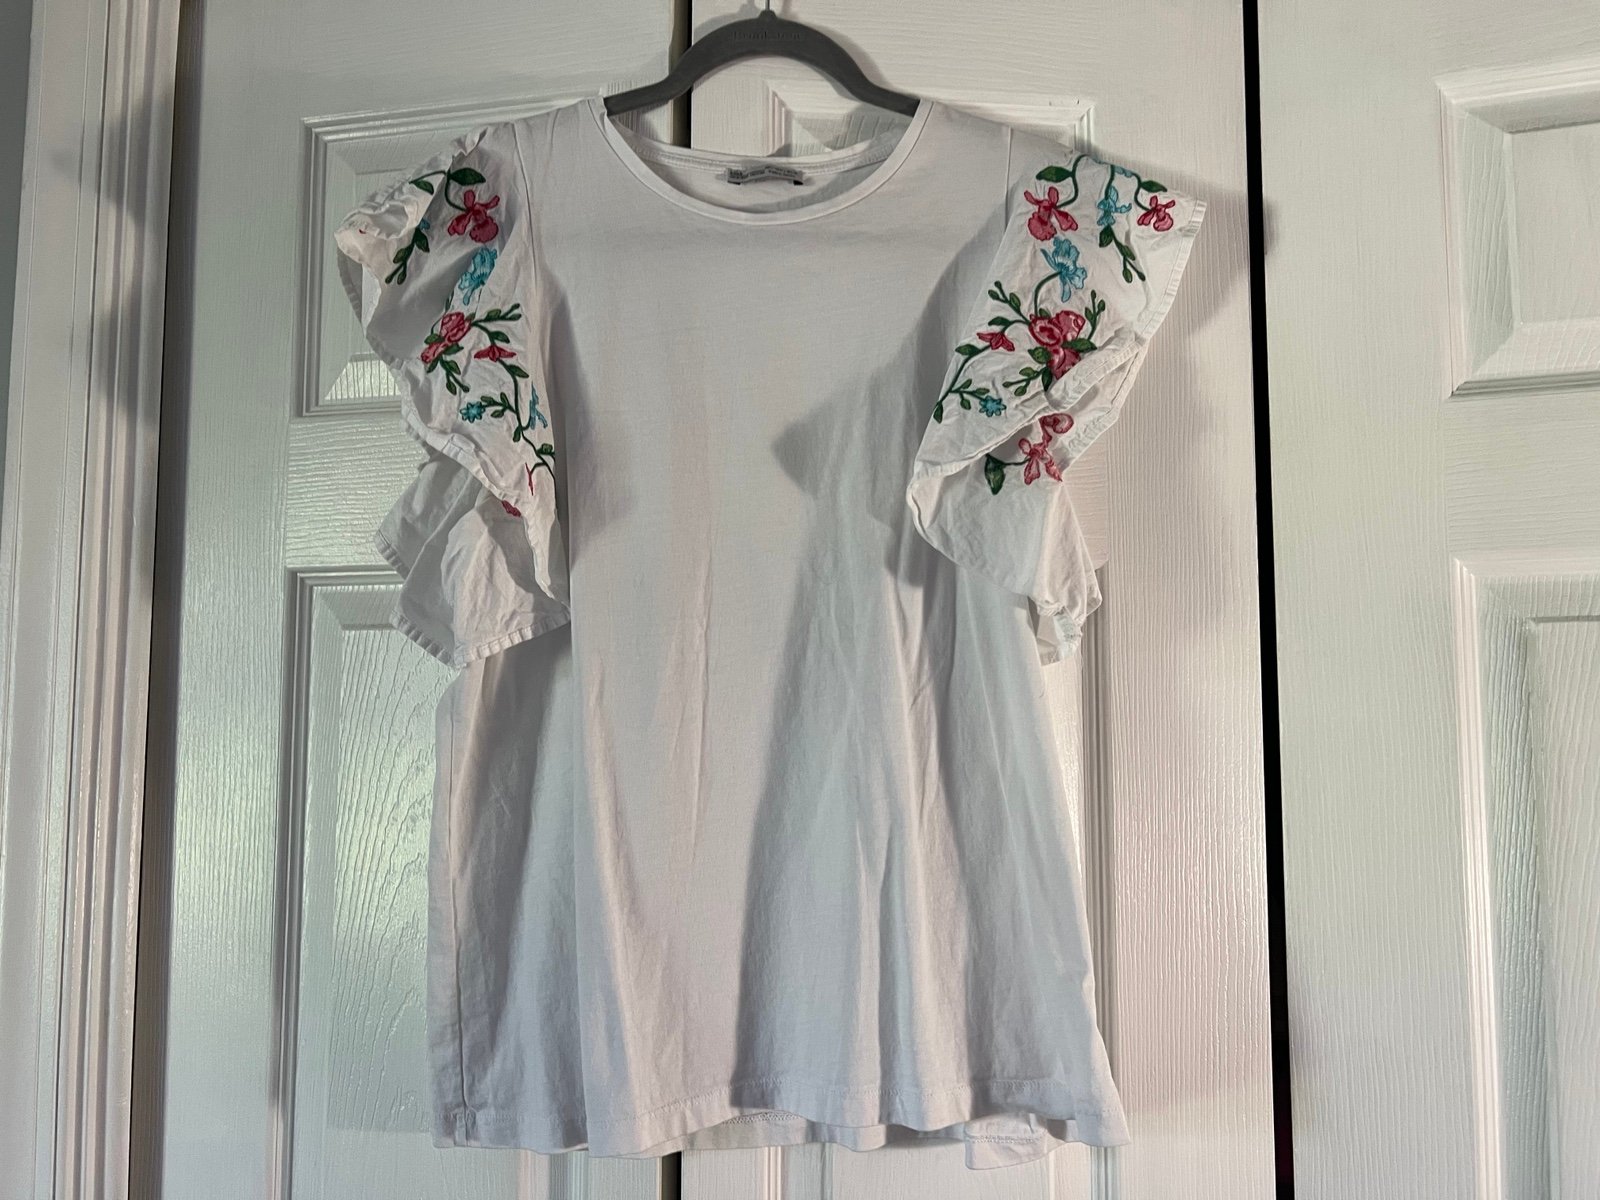 floor price ZARA White T-shirt with Floral Embroidery (L) LH8HorD1x best sale